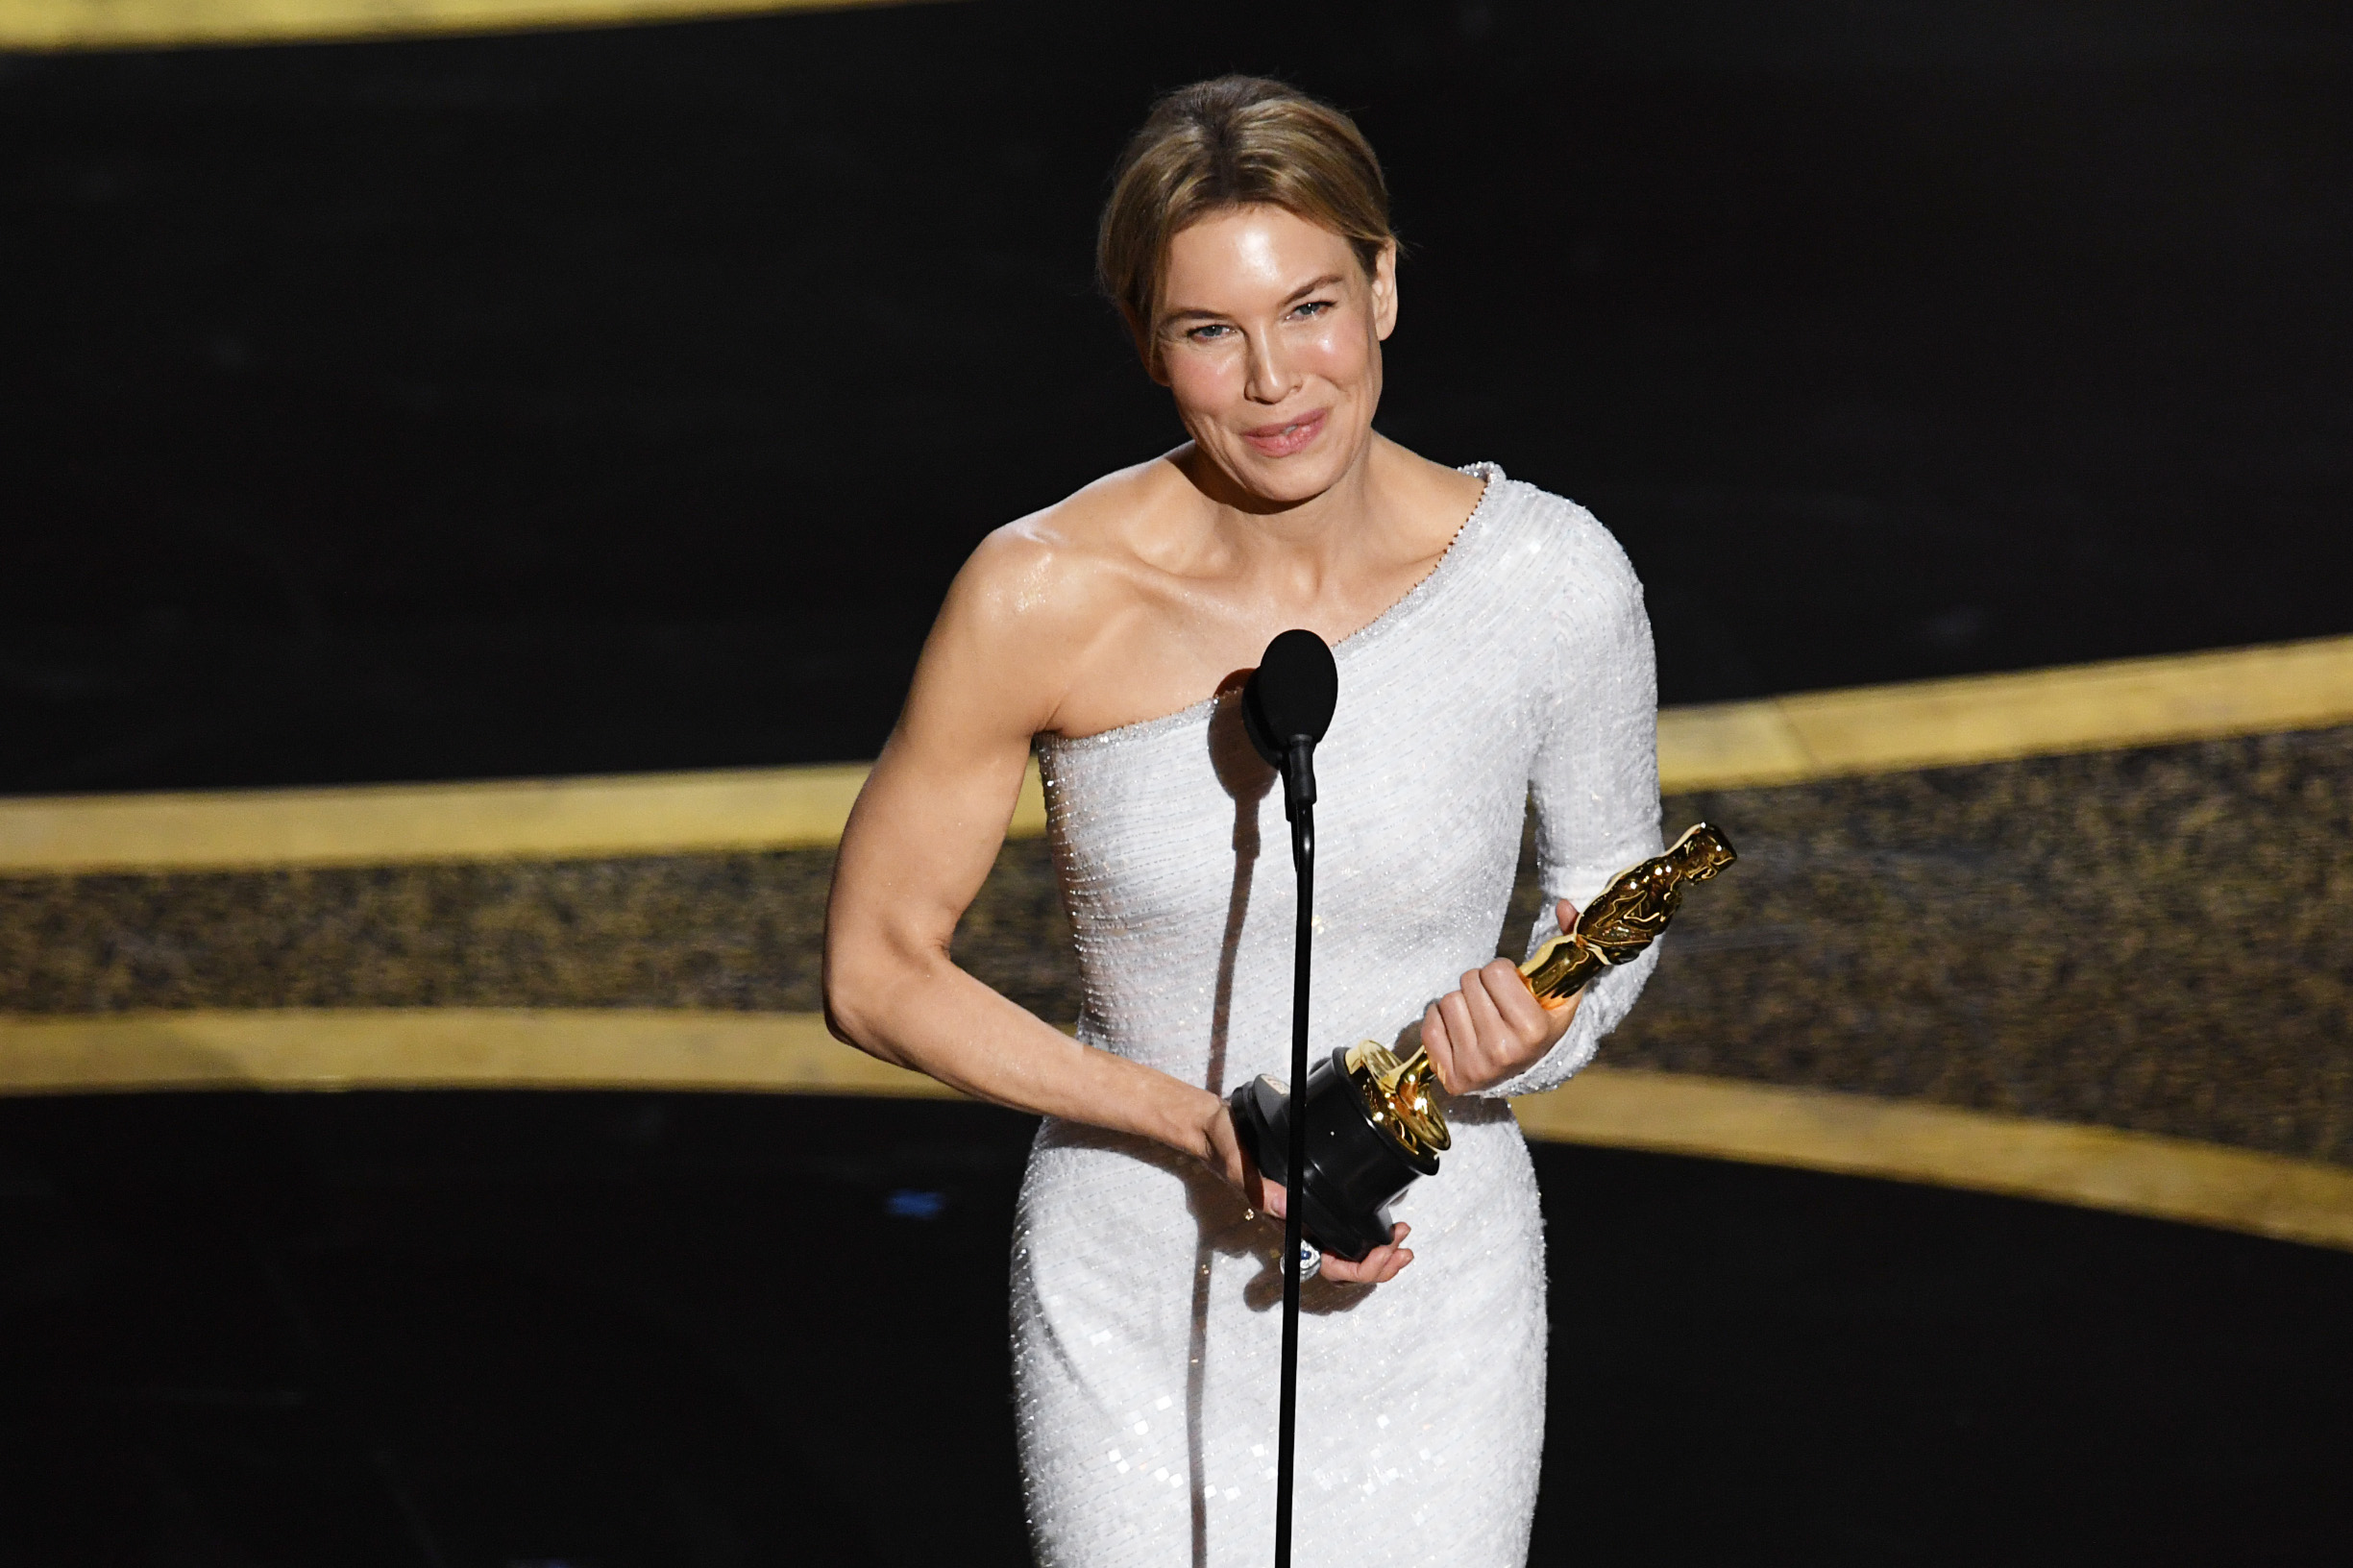 HOLLYWOOD, CALIFORNIA - FEBRUARY 09: Renée Zellweger accepts the Actress in a Leading Role award for 'Judy' onstage during the 92nd Annual Academy Awards at Dolby Theatre on February 09, 2020 in Hollywood, California. (Photo by Kevin Winter/Getty Images)